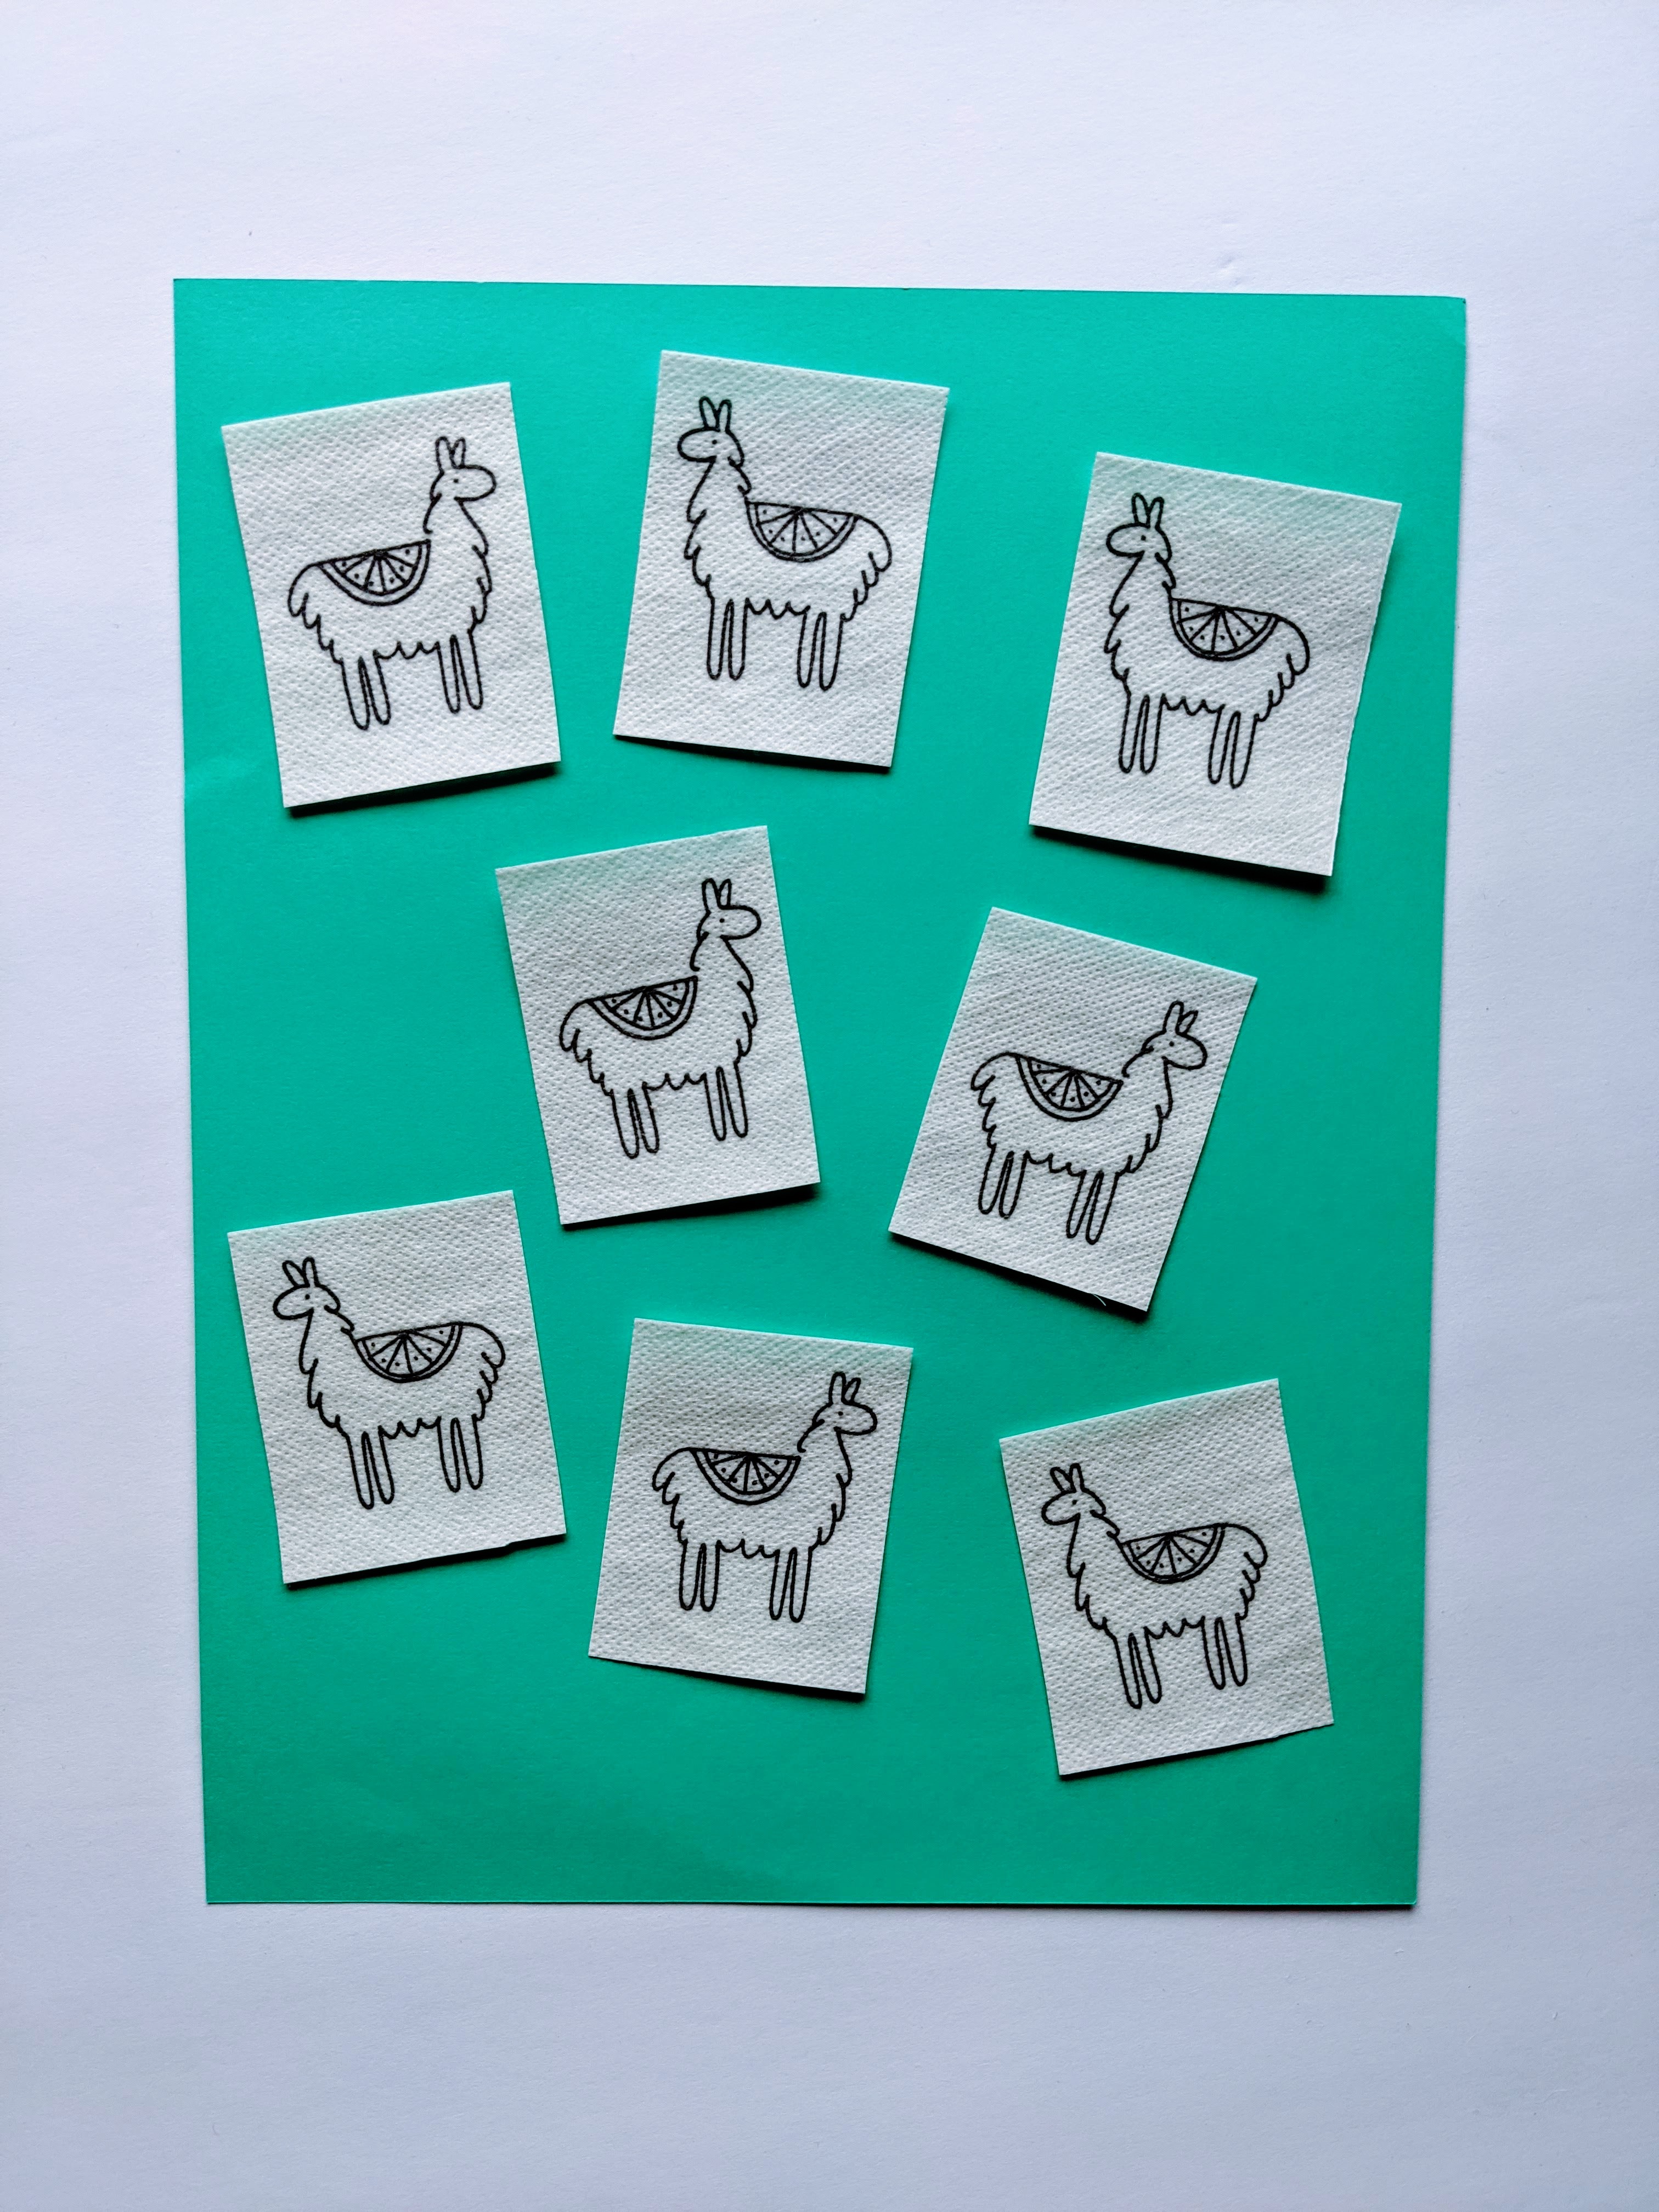 Embroidery Transfer Stickers - A Herd of Llamas